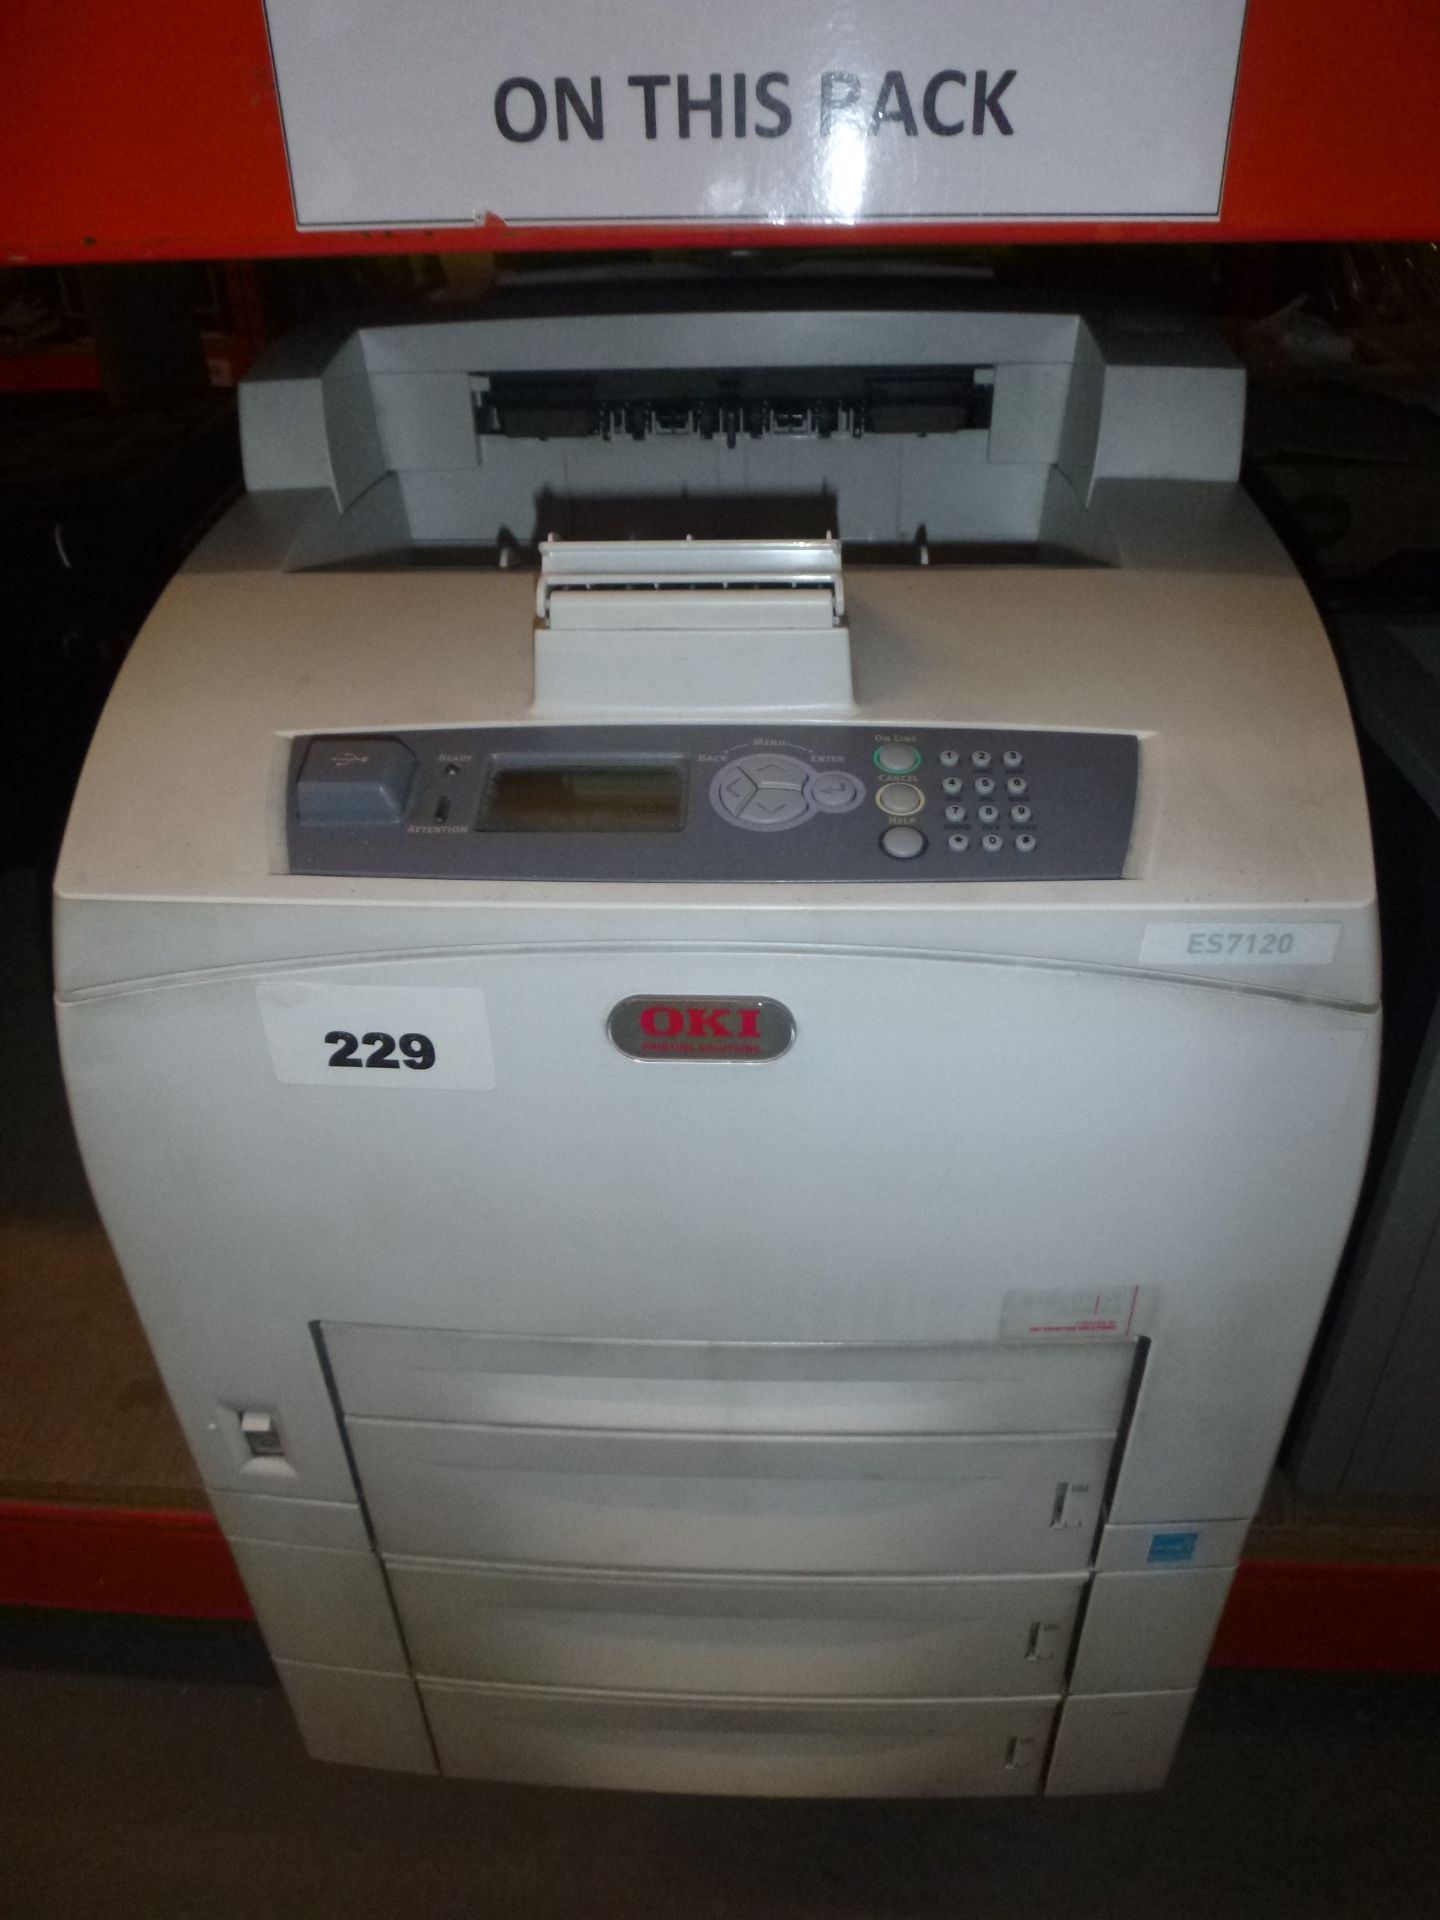 OKI ES 7120 MONO NETWORK LASER PRINTER WITH TWO EXTRA TRAYS AND A TEST PRINT